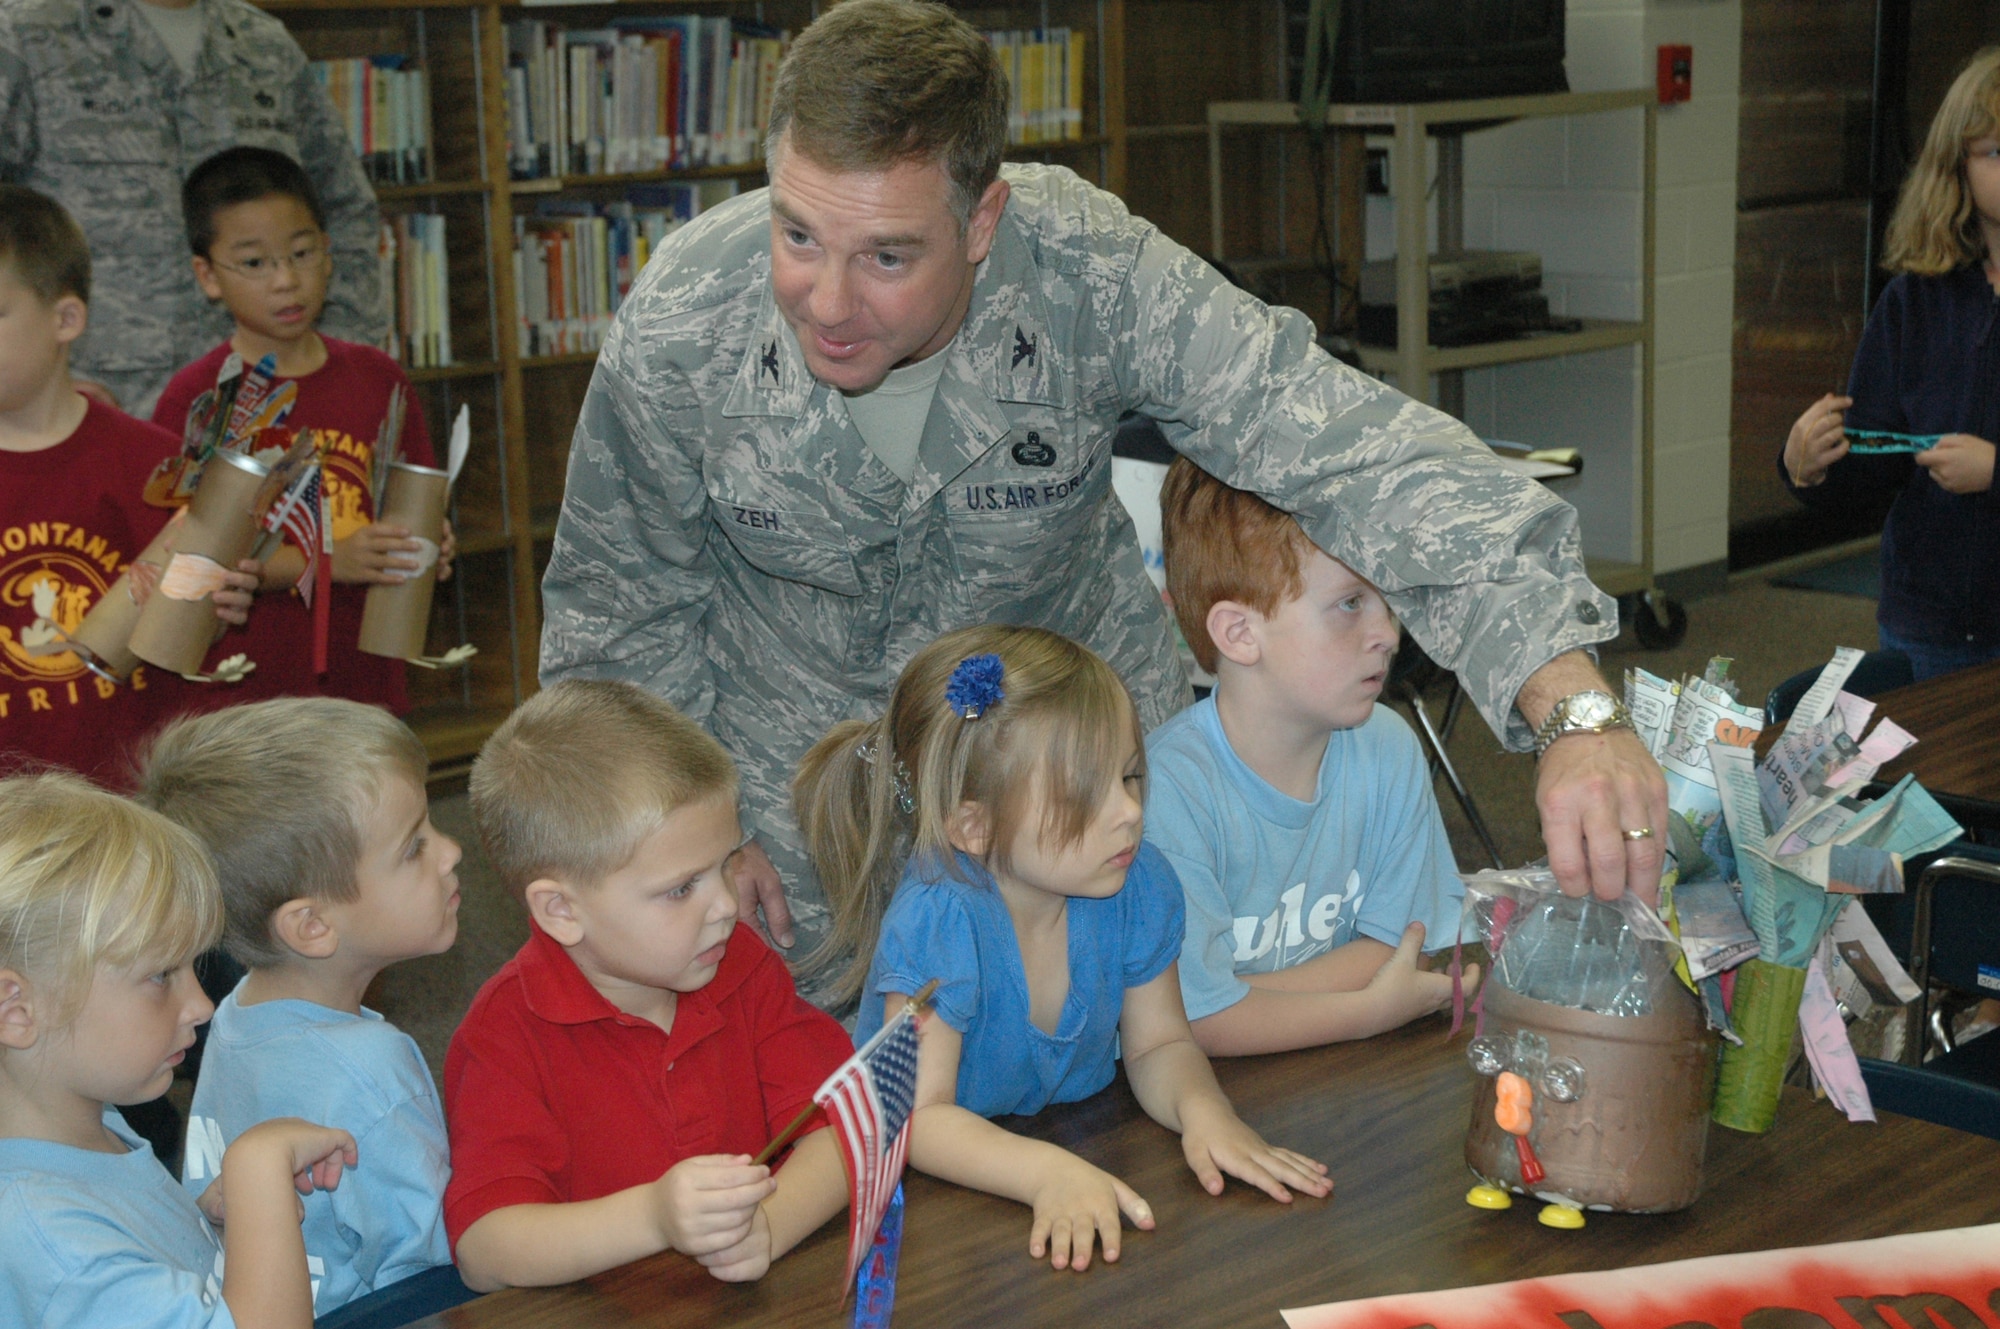 Col. David Zeh, 325th Mission Support Group commander, questions the Tyndall Elementary School kindergartners about their recycling project Friday.  (U.S. Air Force photo by Airman 1st Class Anthony J. Hyatt)